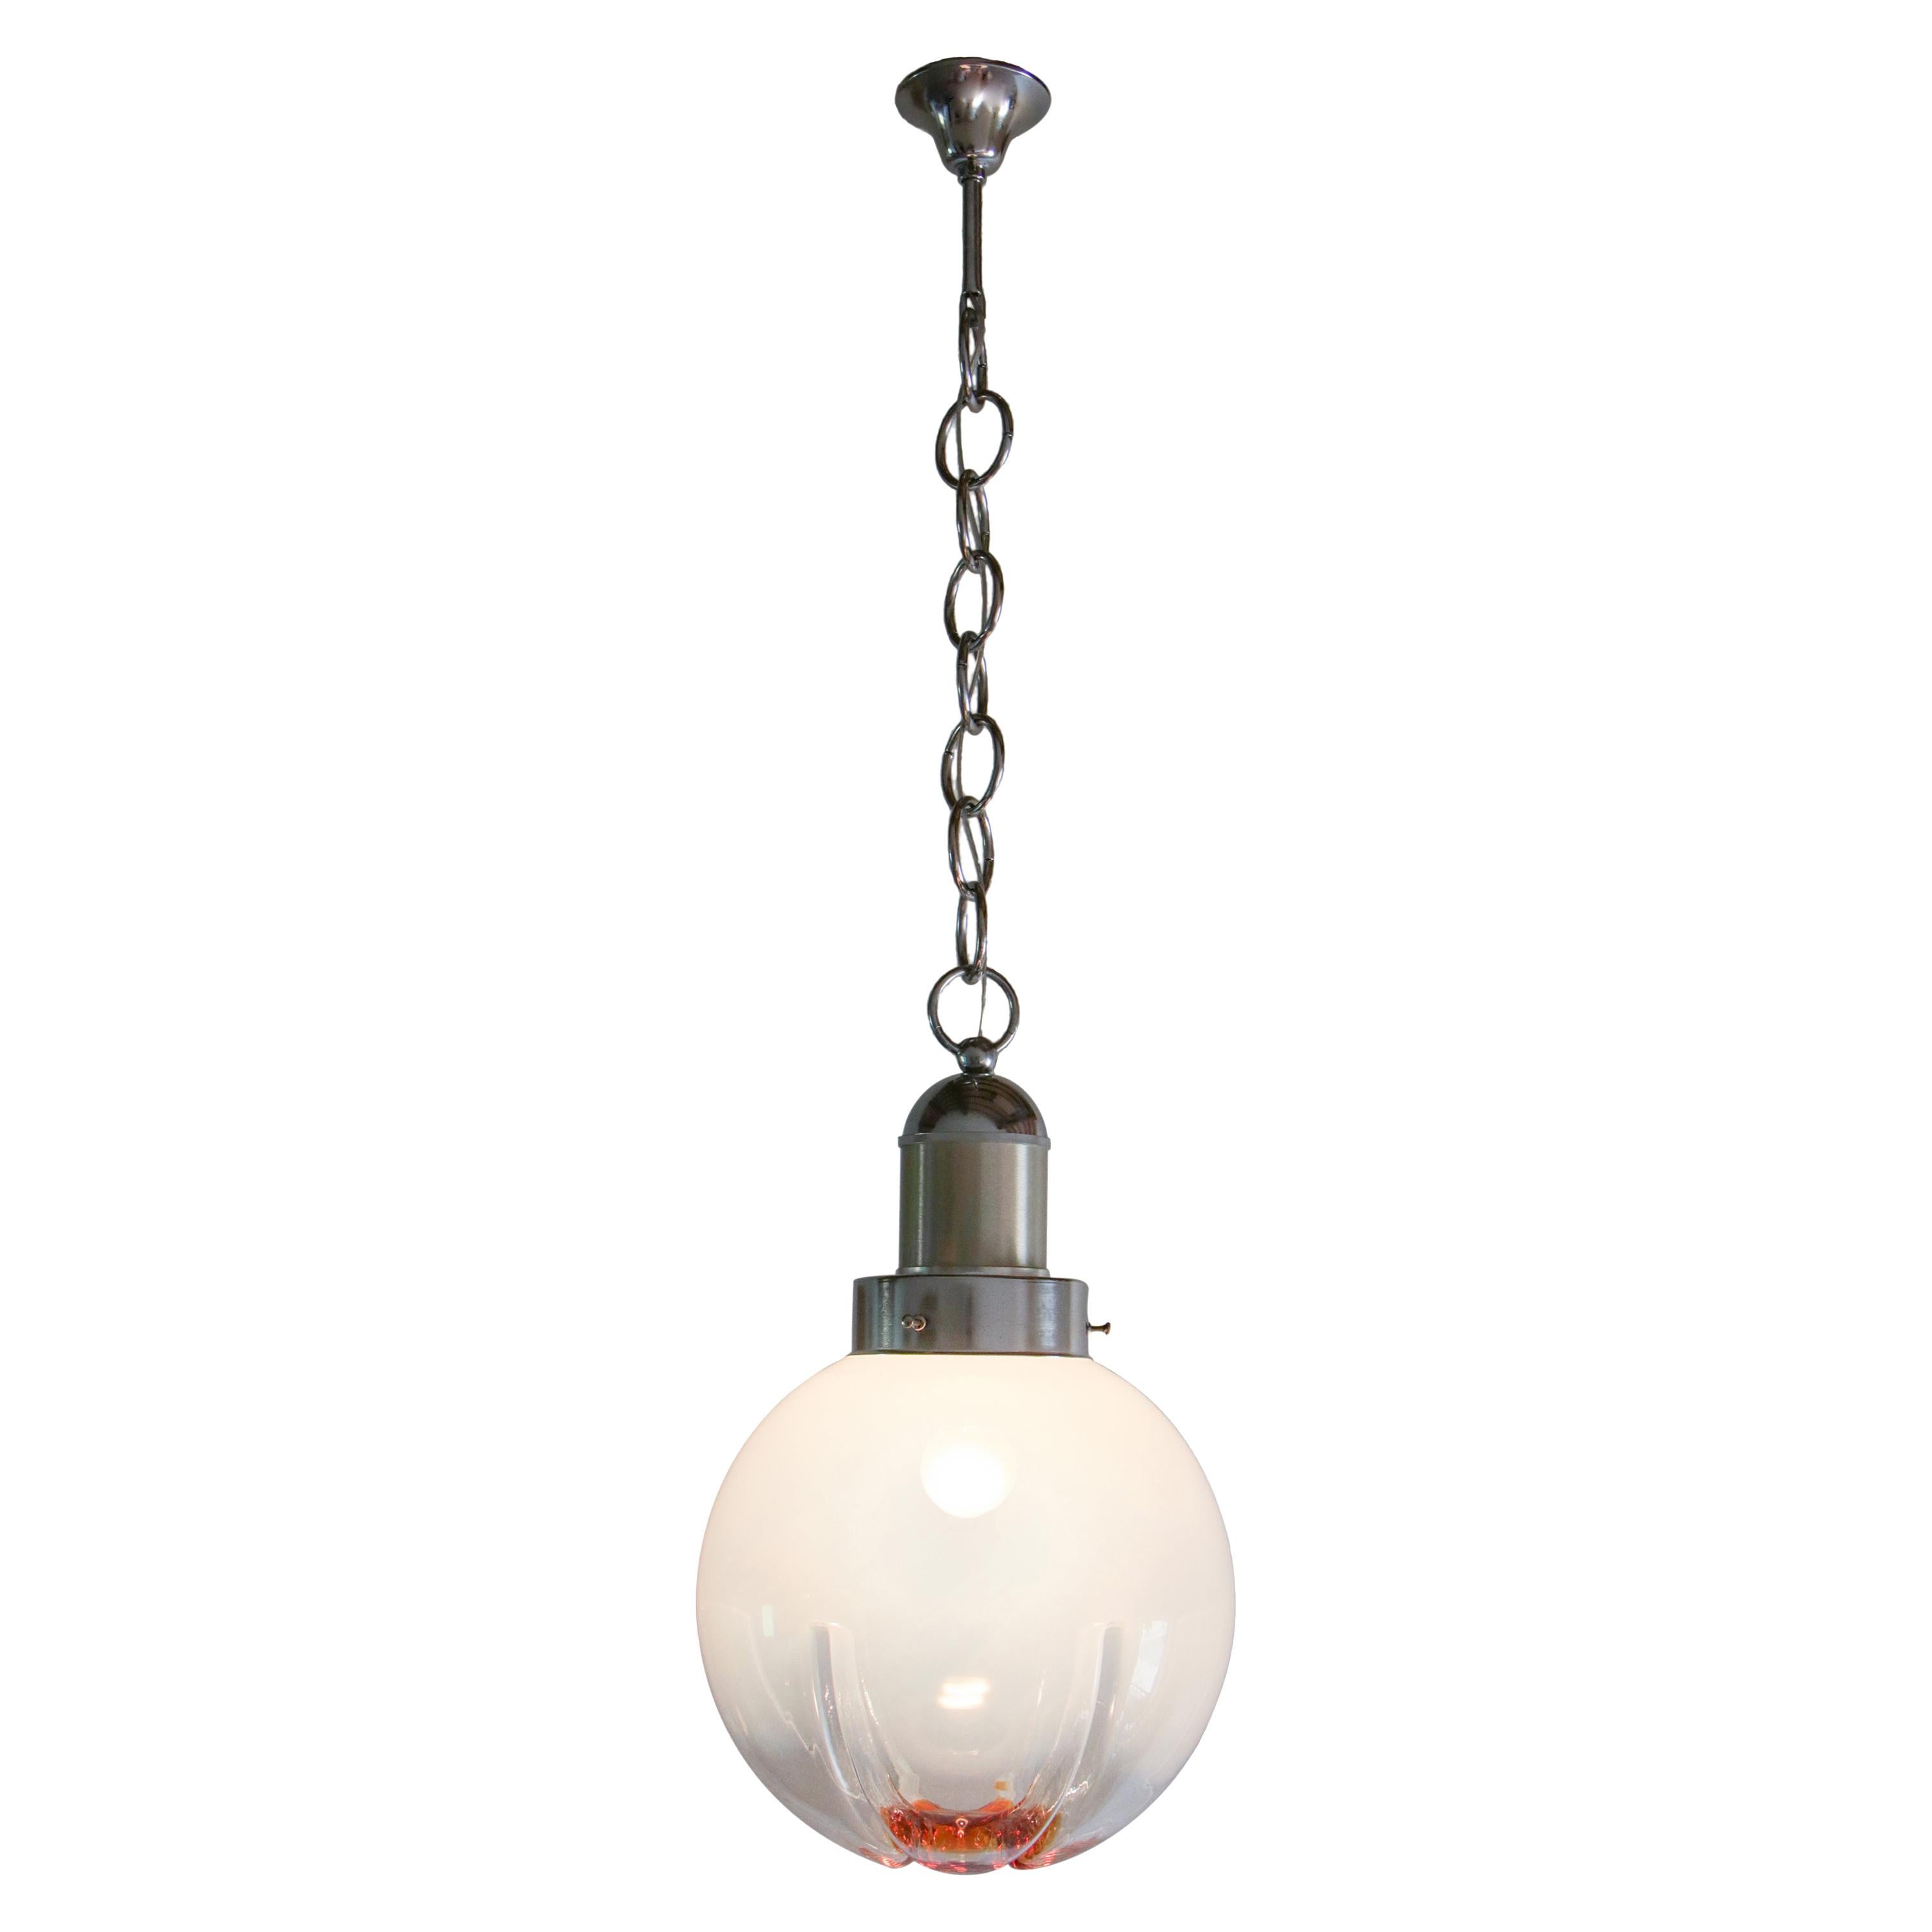 Italian Space Age Ball Pendant Lamp Attributed to Mazzega, 1970s For Sale